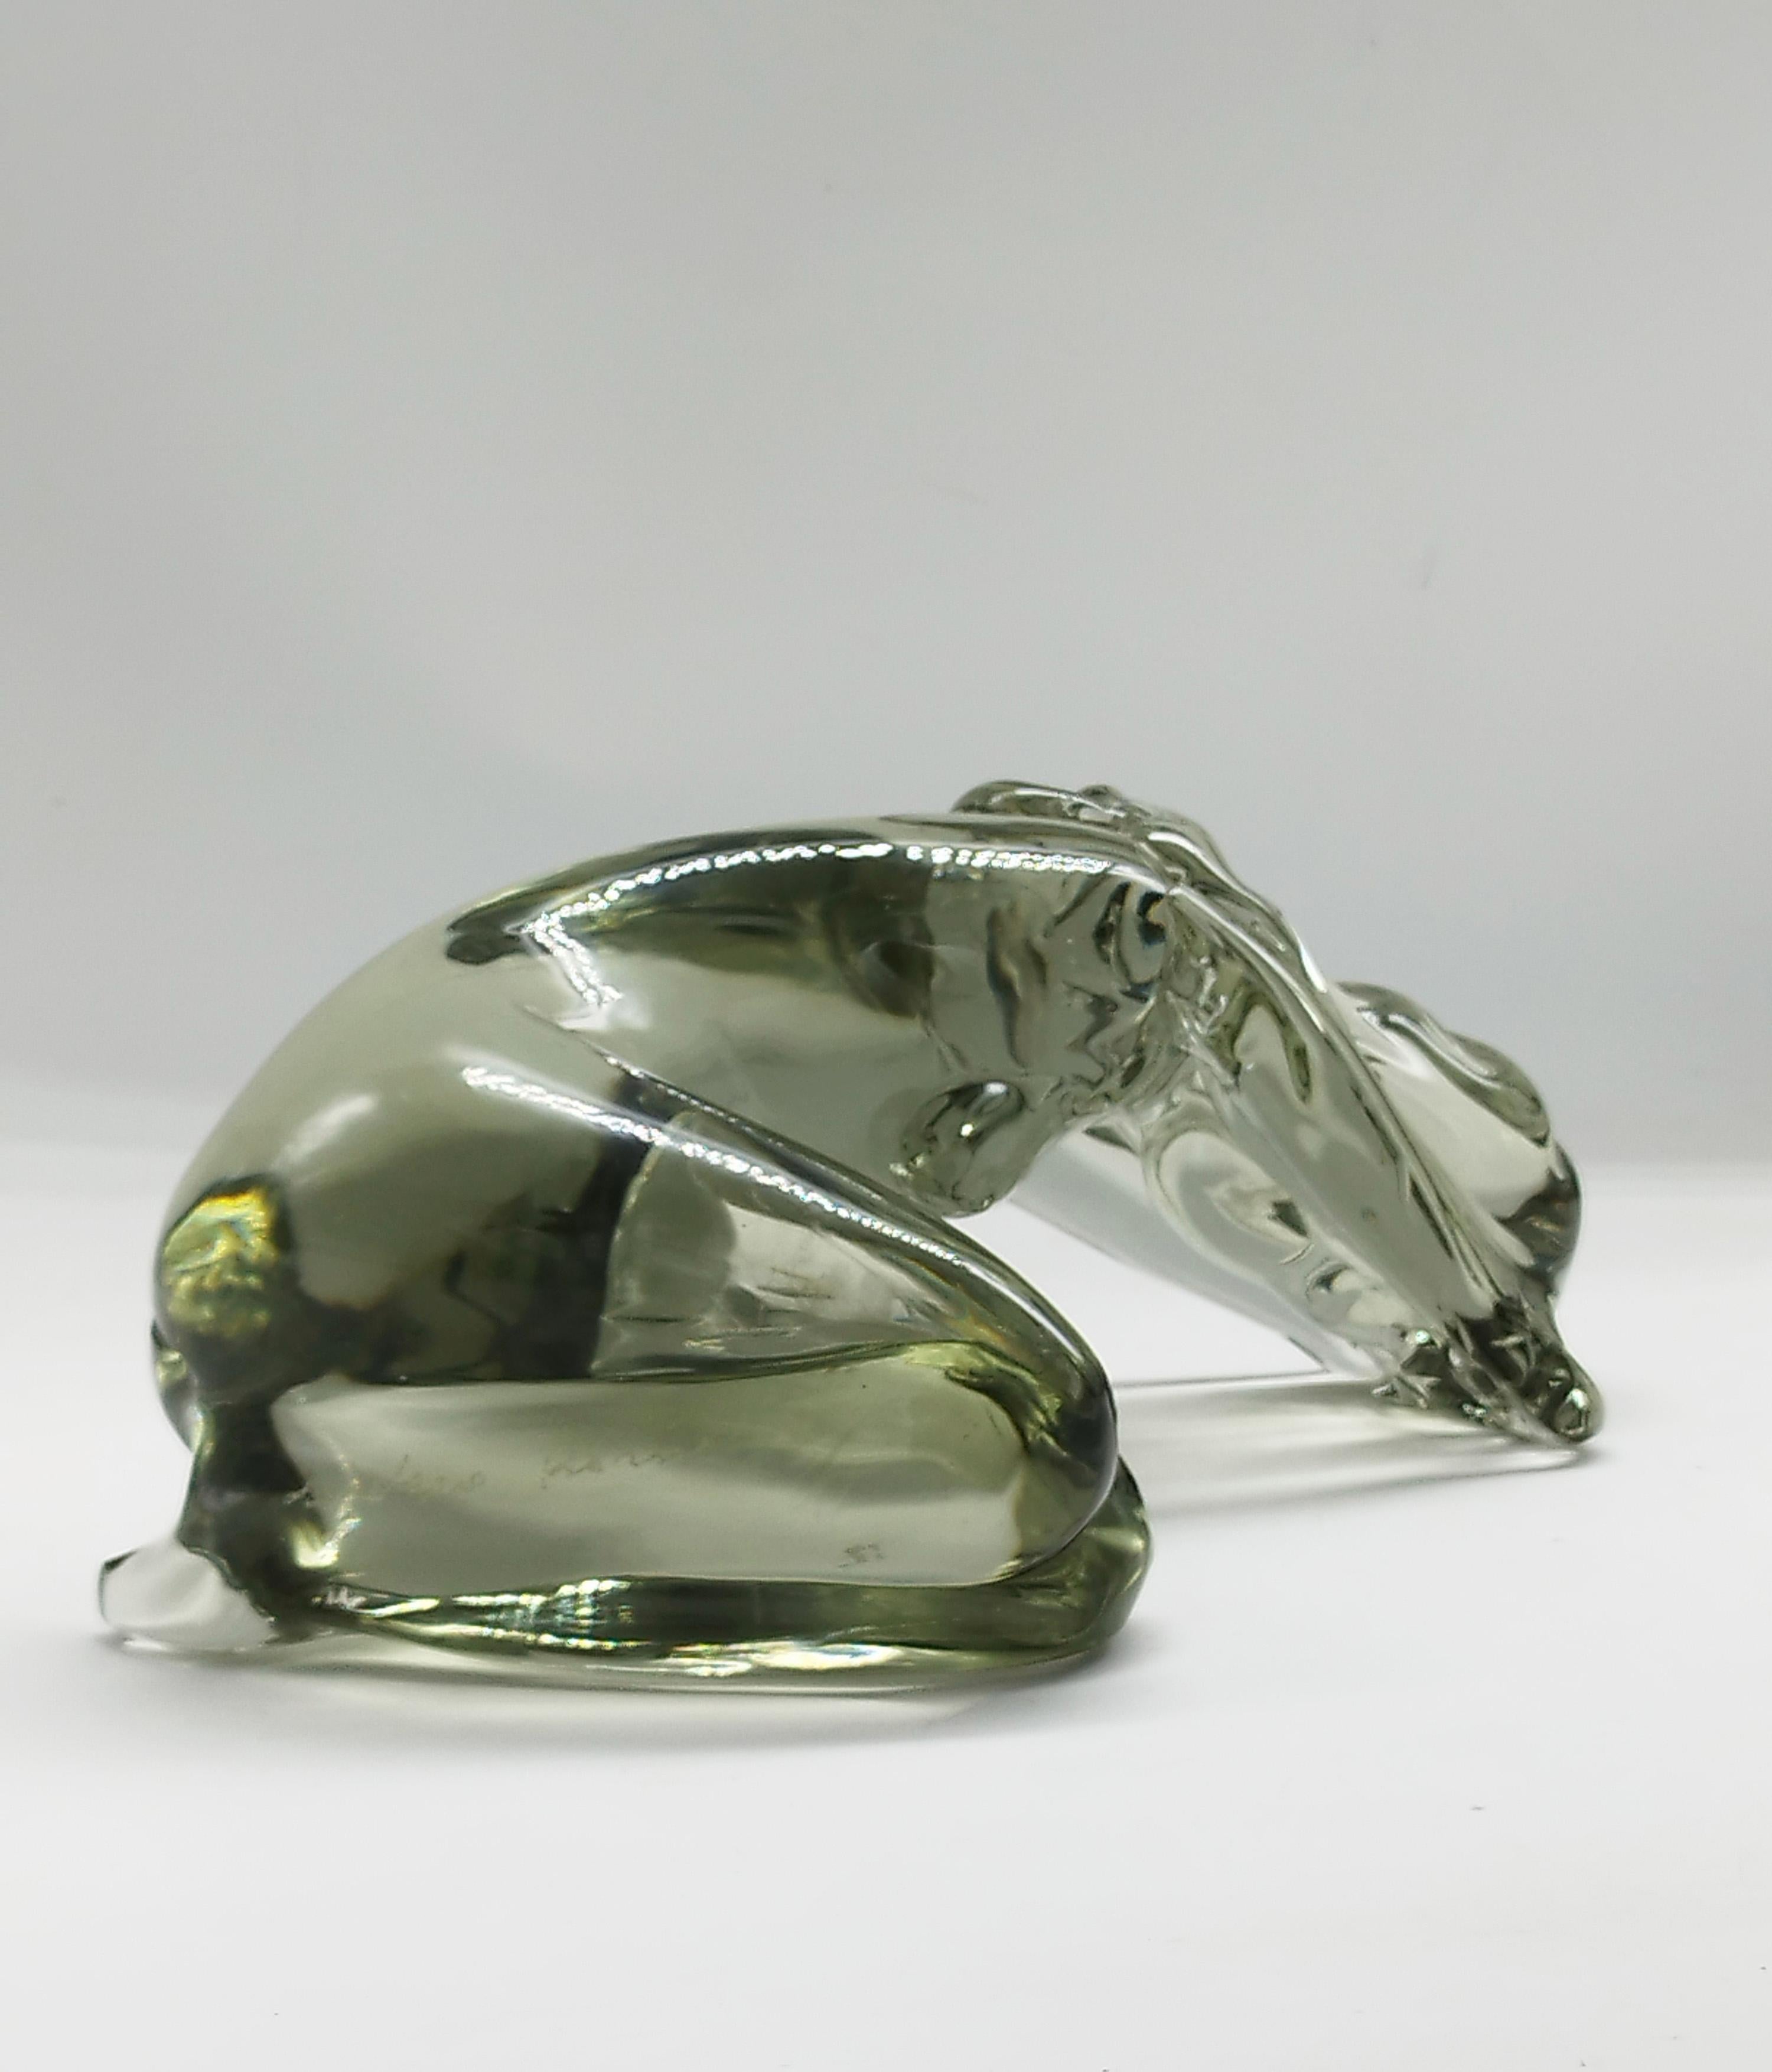 A splendid and rare Murano fume' crystal glass sculpture, hand ground and polished, by the world-famous artist Loredano Rosin, made in Italy between 1960/70.
The sculpture is a figure of a woman with her head in her hands and in a kneeling